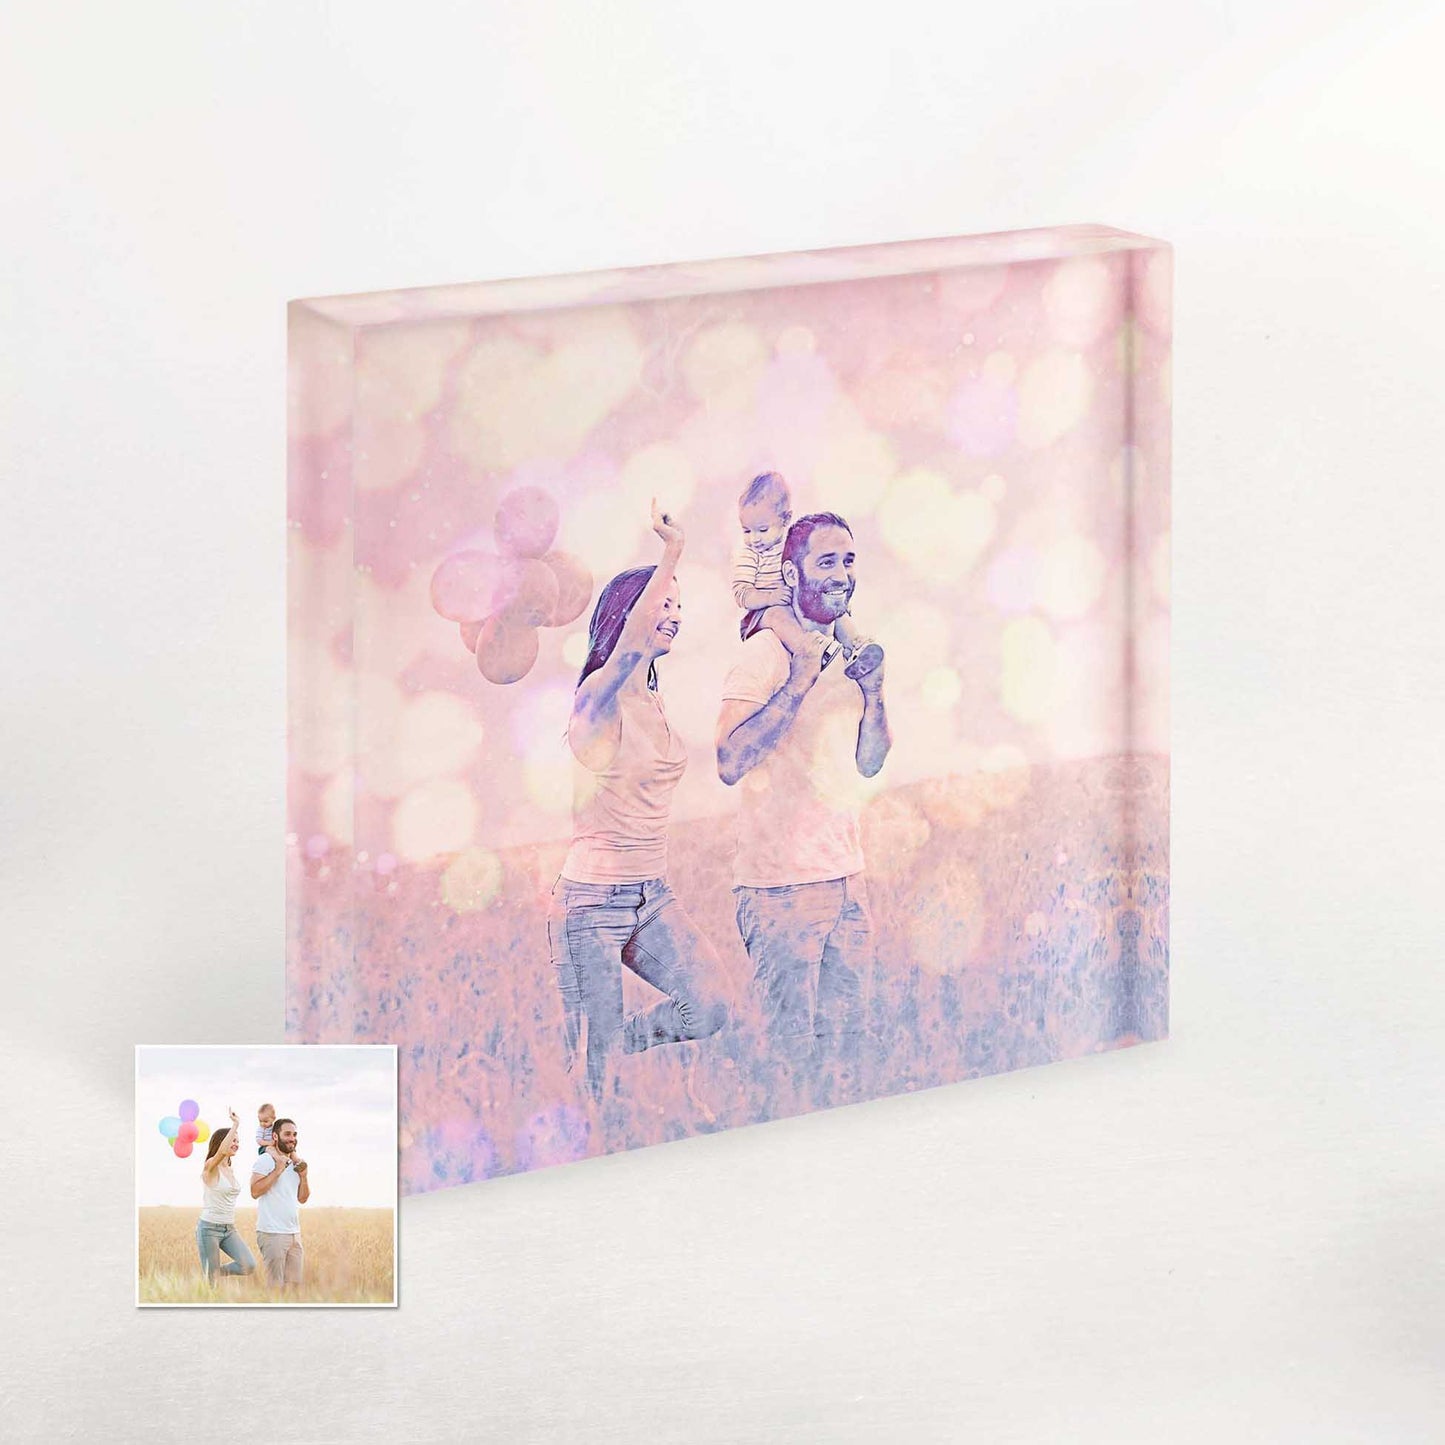 Step into the world of cinema with a Personalised Special FX Acrylic Block Photo, highlighting a film effect that brings a cool and fresh vibe. This unique and novelty artwork is made to order, making it a perfect anniversary or birthday gift